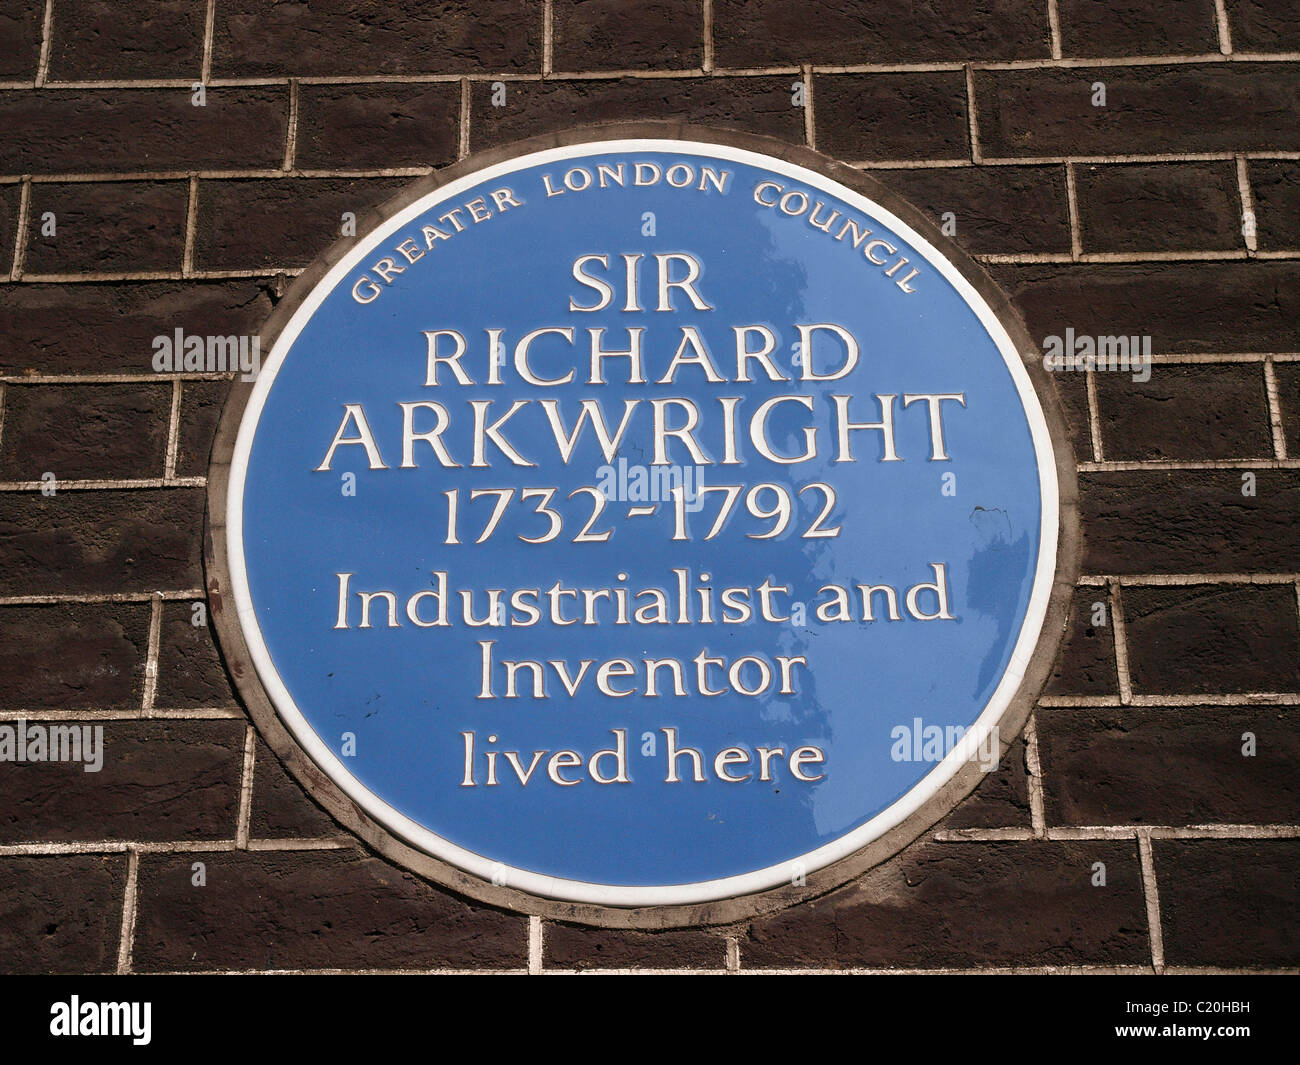 Blue Plaque to Sir Richard Arkwright Industrialist and Inventor 8 Adam Street, London, WC2N 6AA Stock Photo